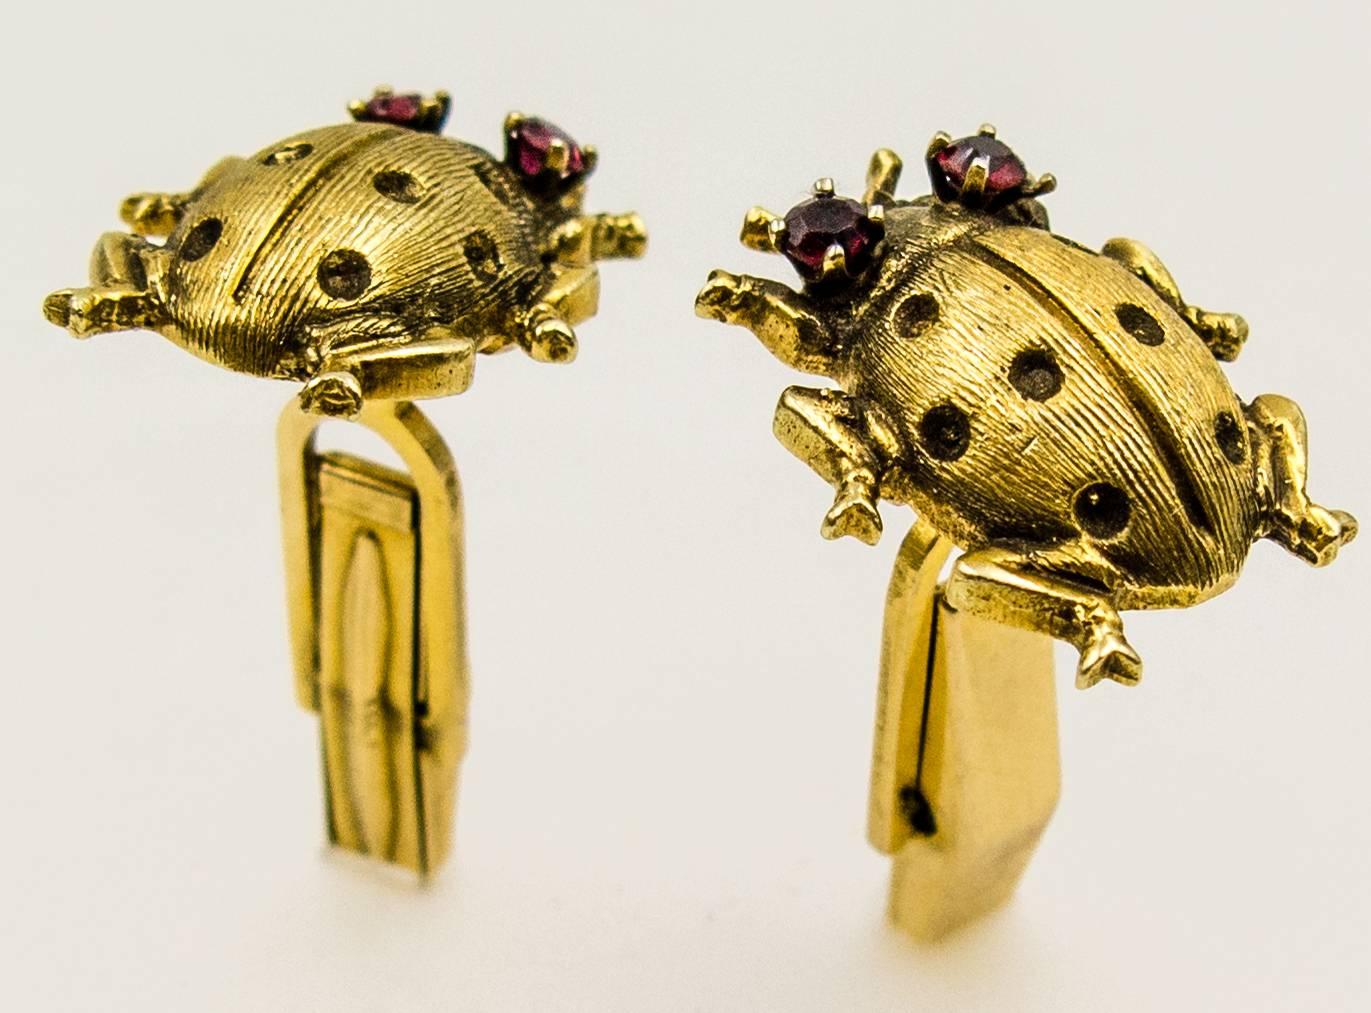 Charming 14 karat gold ladybug cufflinks with round and sparkling red garnet eyes will be a conversation piece in any shirt cuff.  The domed bodies are accented with straight engraved lines and dotted depressions, and its footpads are poised for